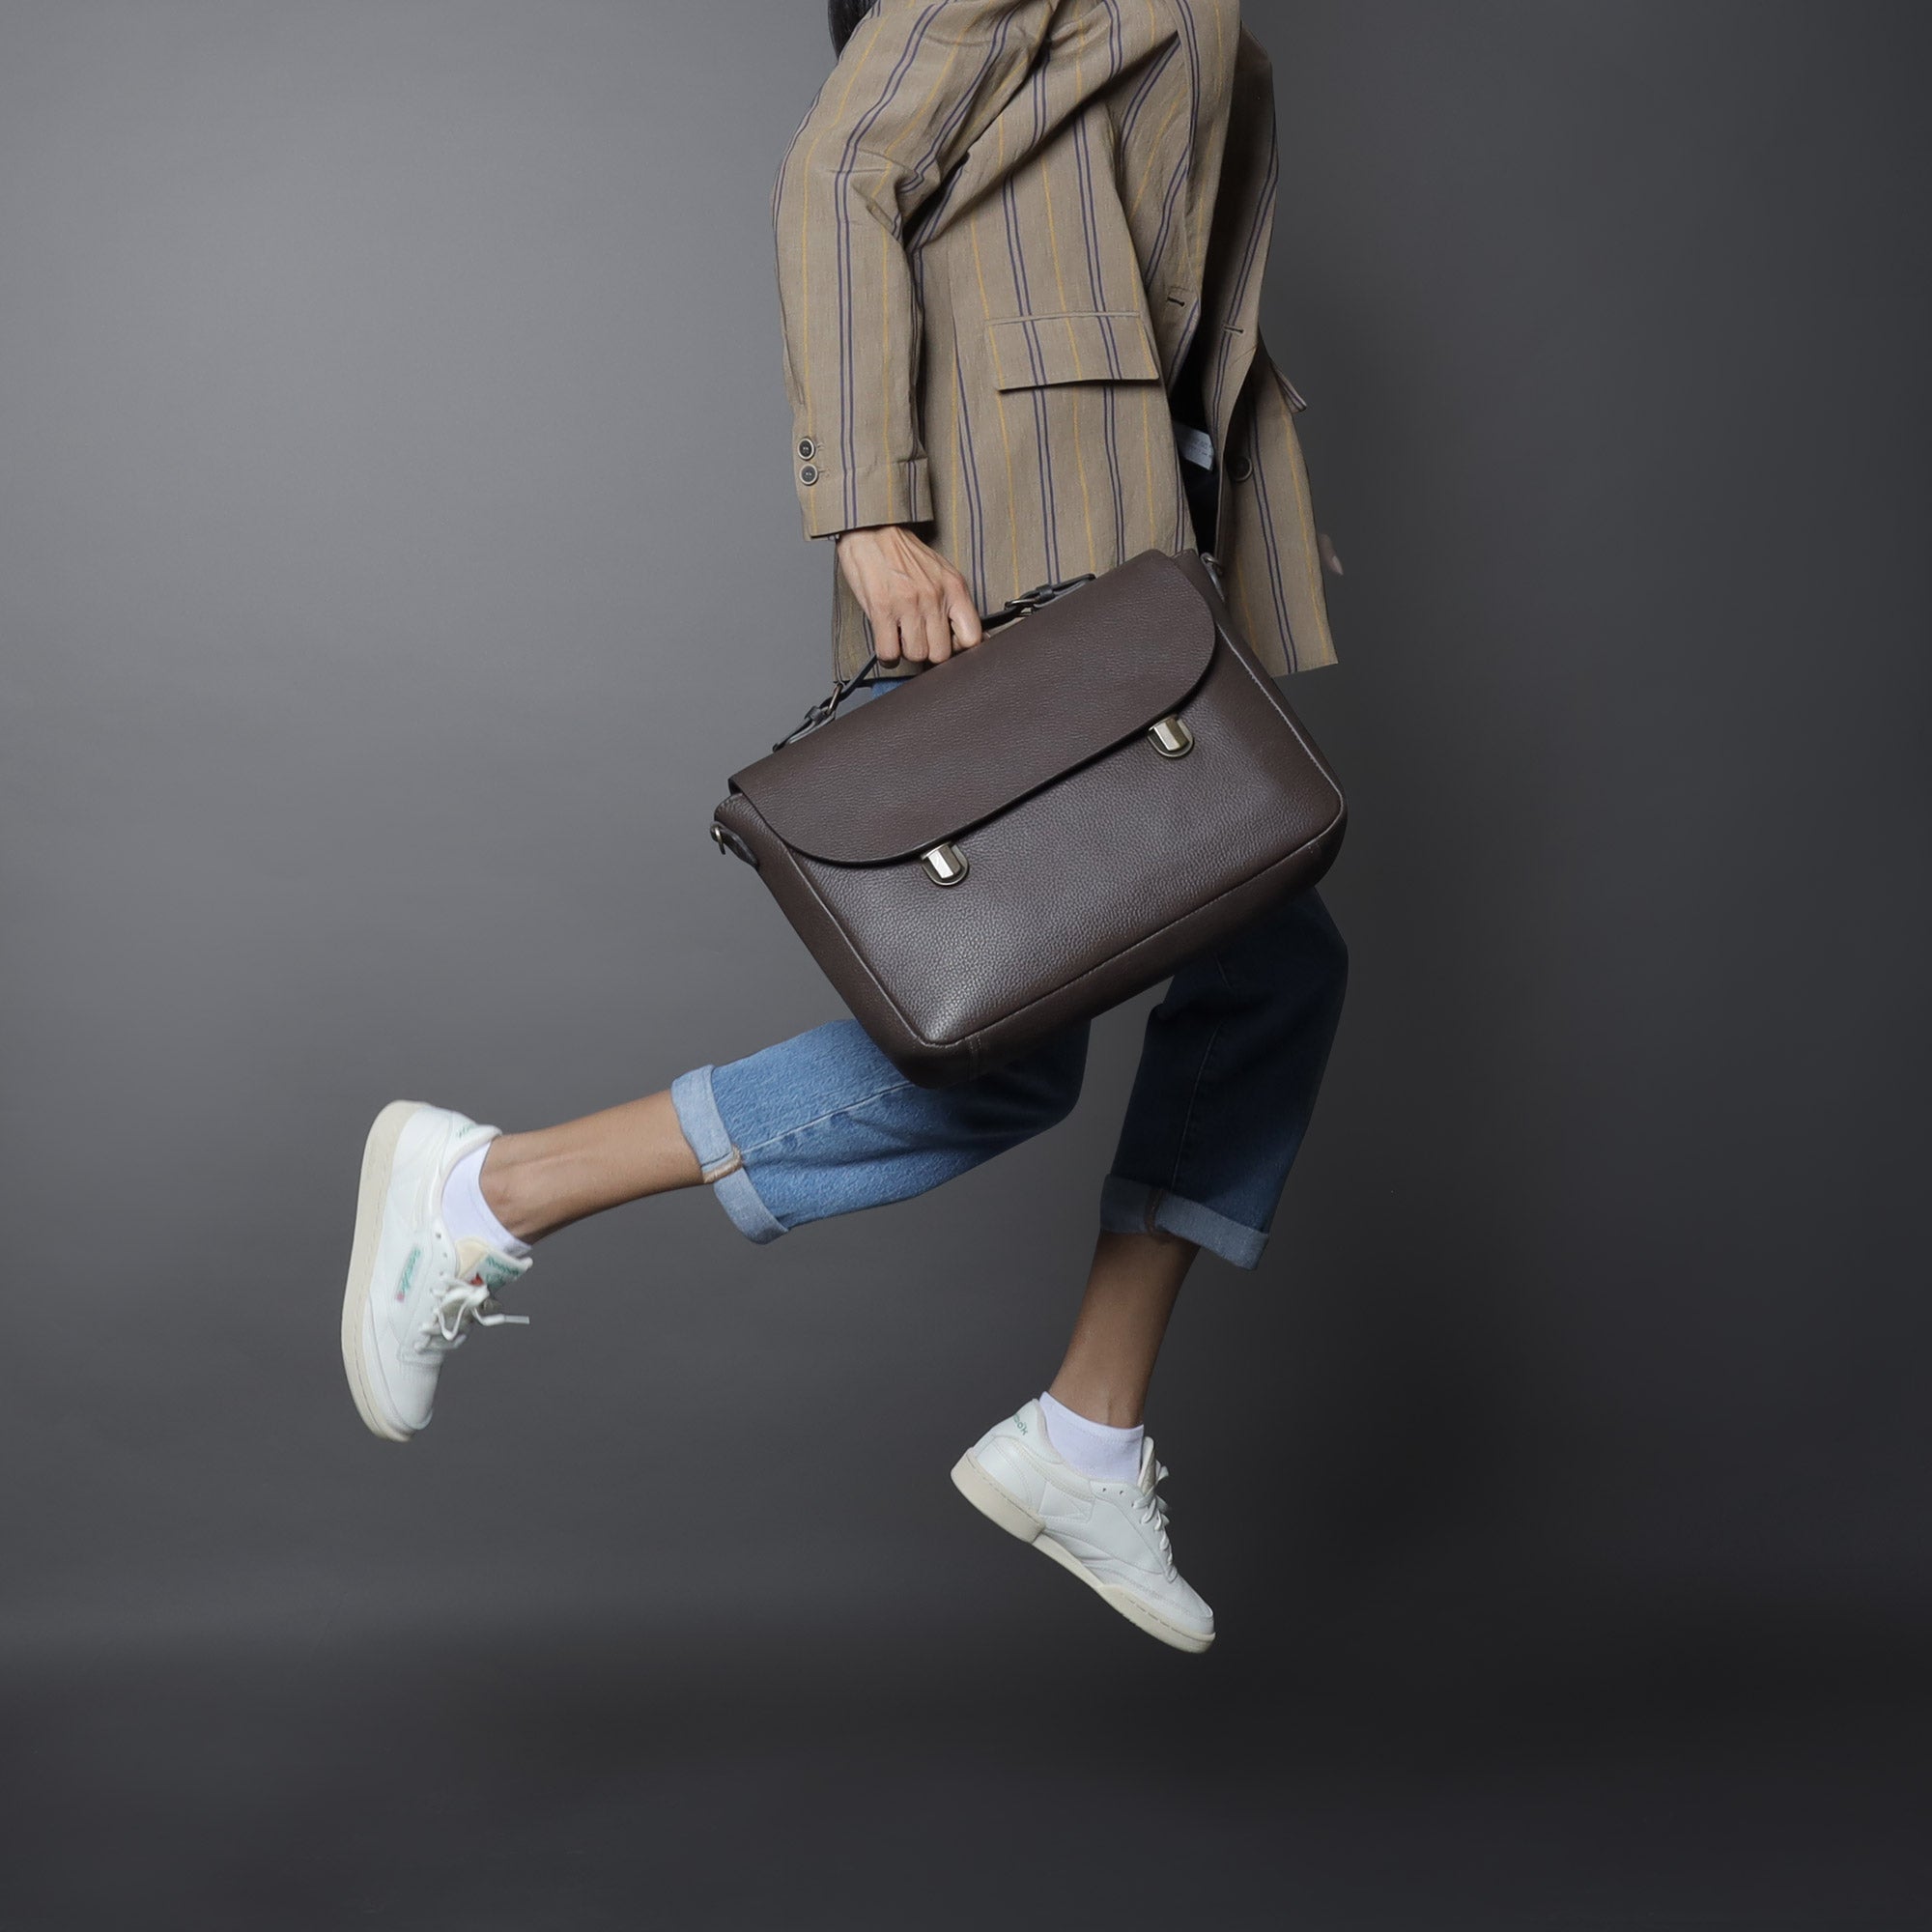 brown leather briefcase for women